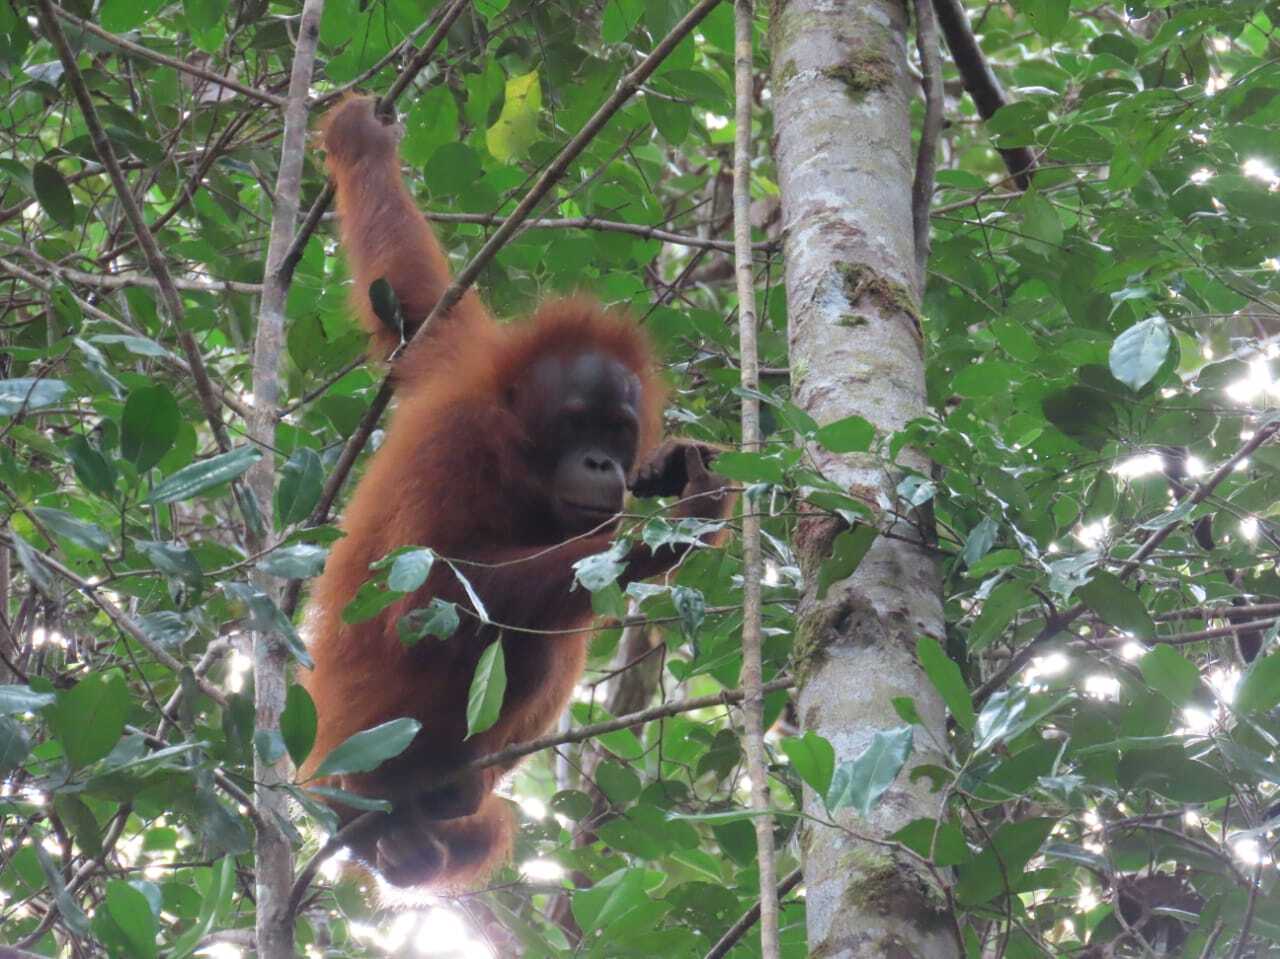 Orangutan observed in MTI's conservation area (photo taken May 2022)